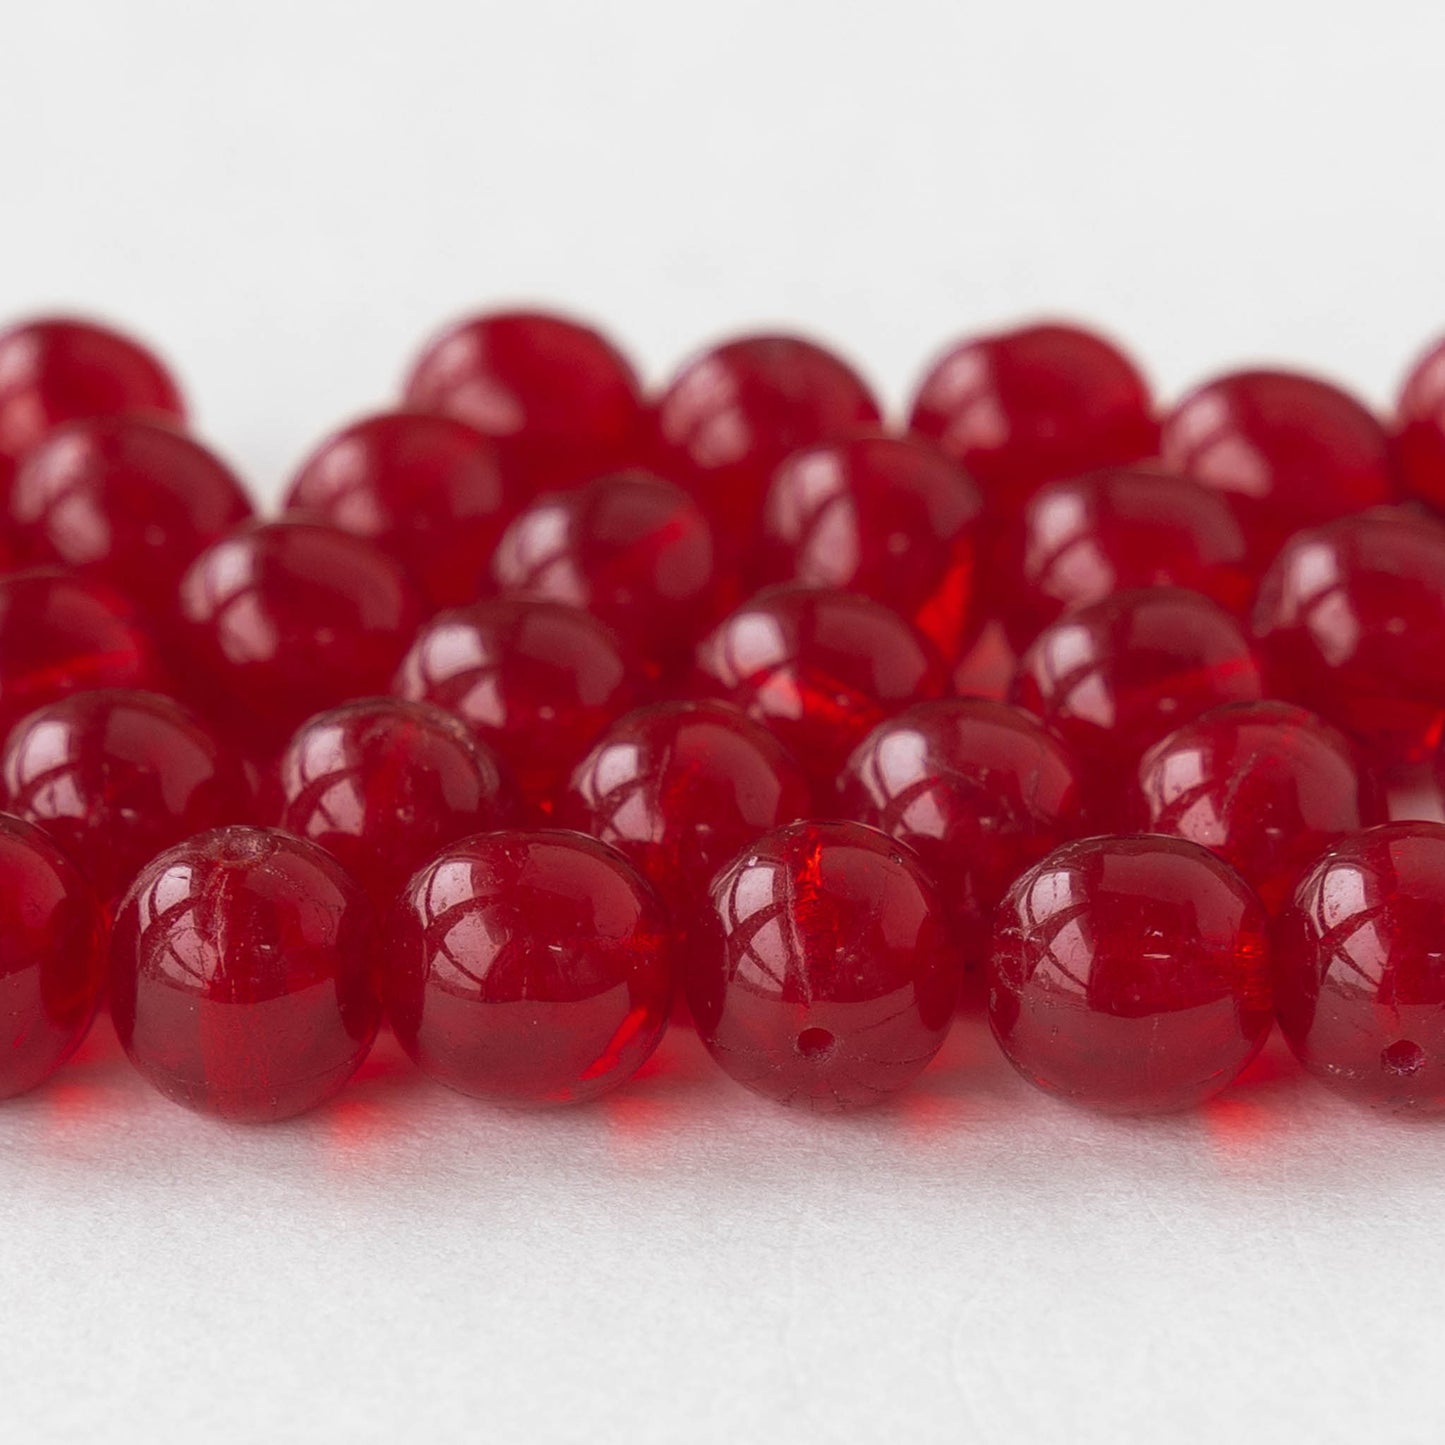 8mm Round Glass Beads - Transparent Red - 60